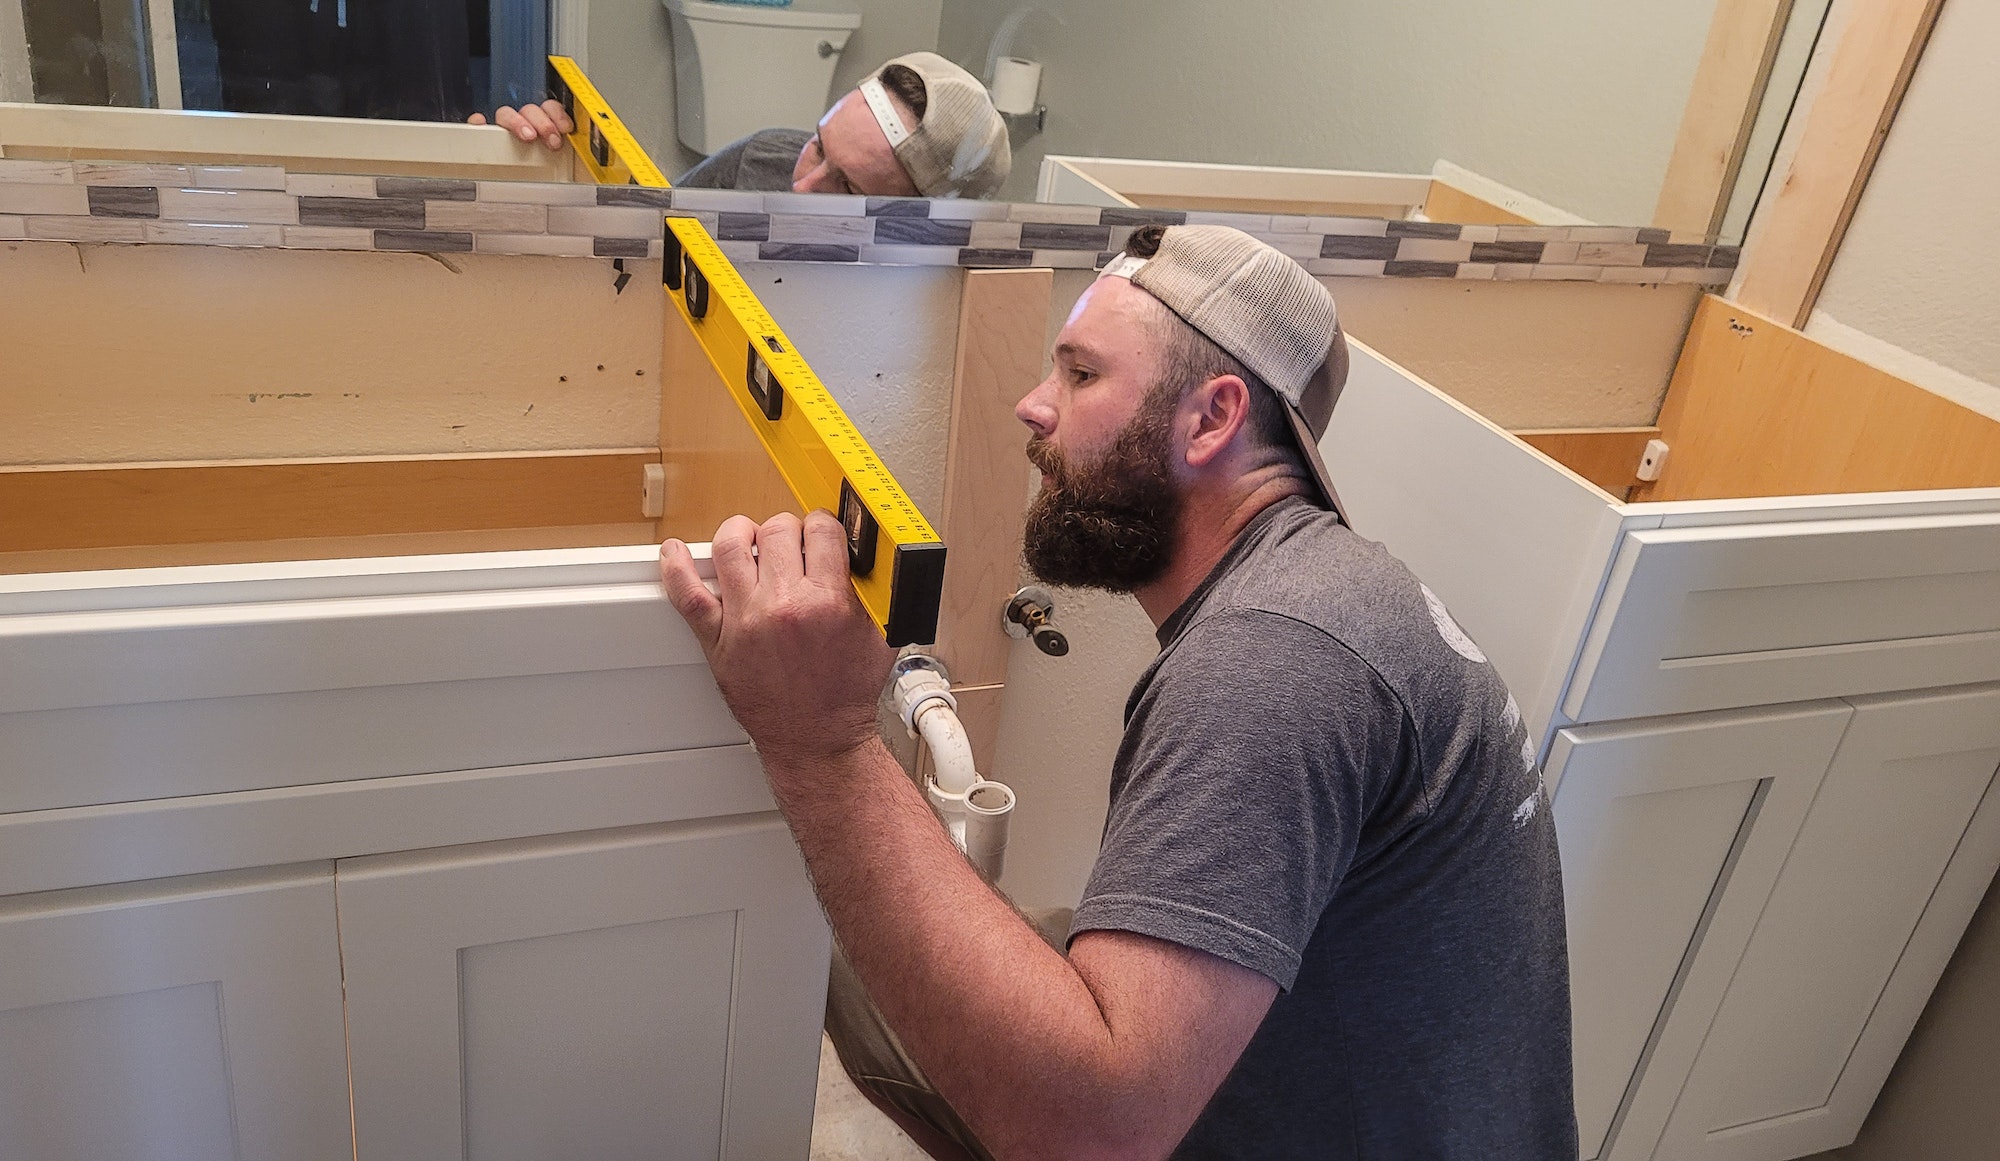 Remodel specialist making sure the cabinets are installed properly in bathroom.